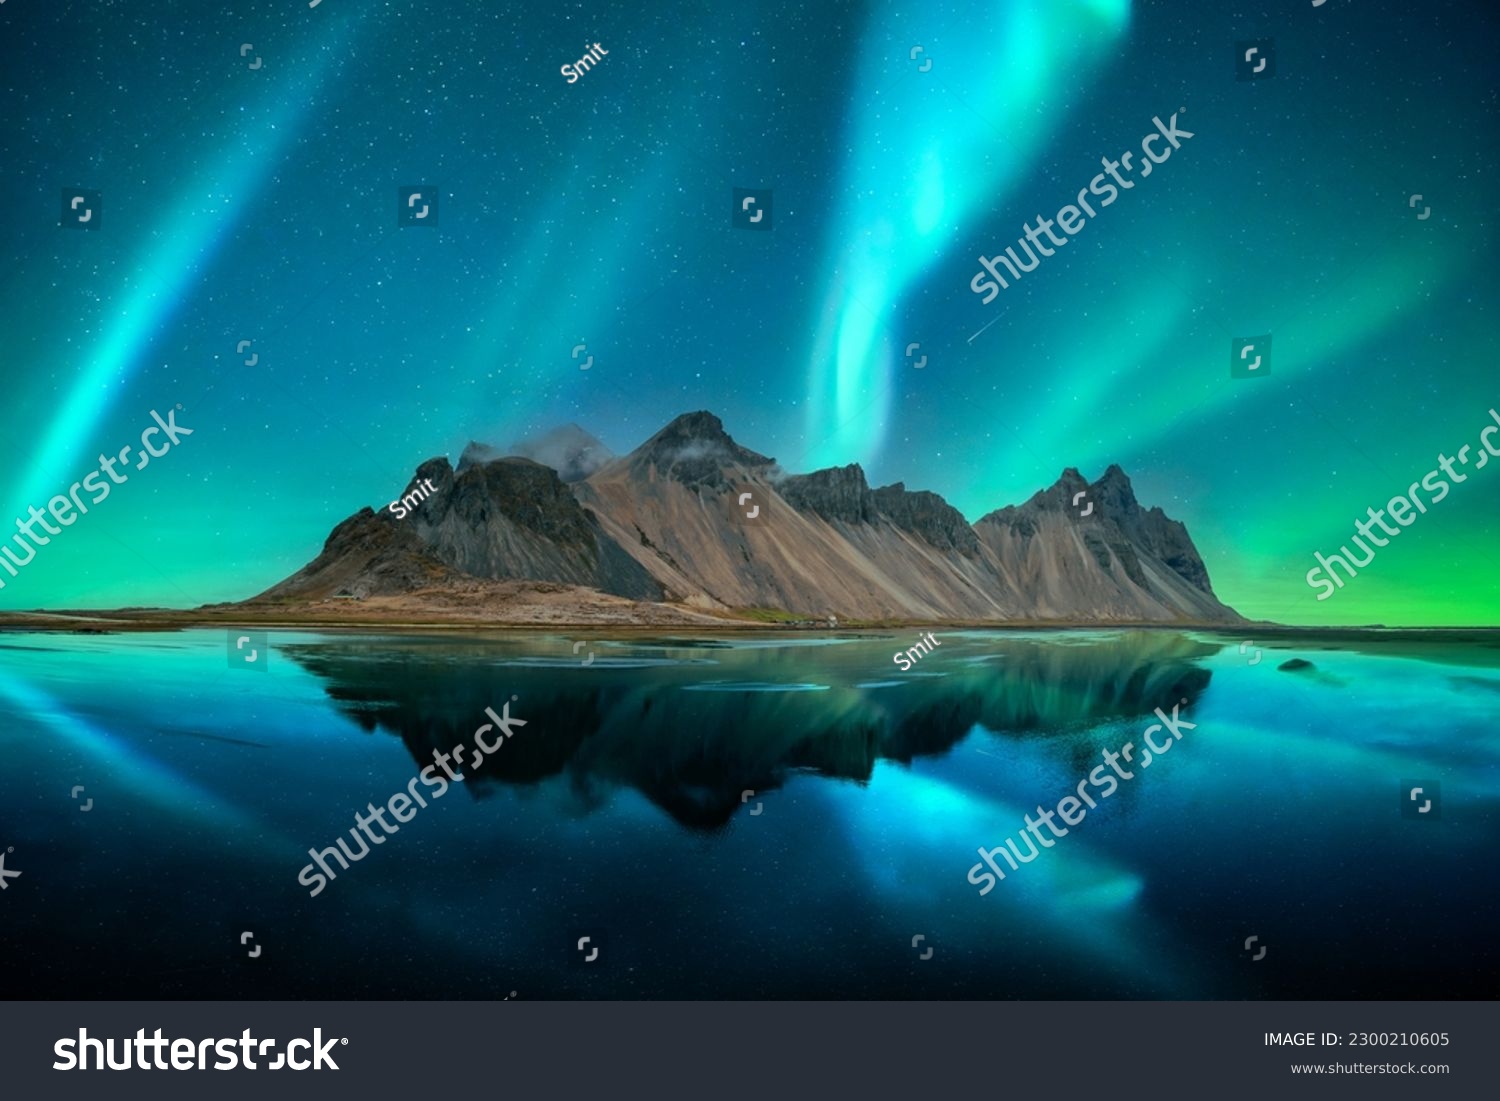 Aurora borealis Northern lights over famous Stokksnes mountains on Vestrahorn cape. Reflection in the clear water on the epic skies background, Iceland. Landscape photography #2300210605